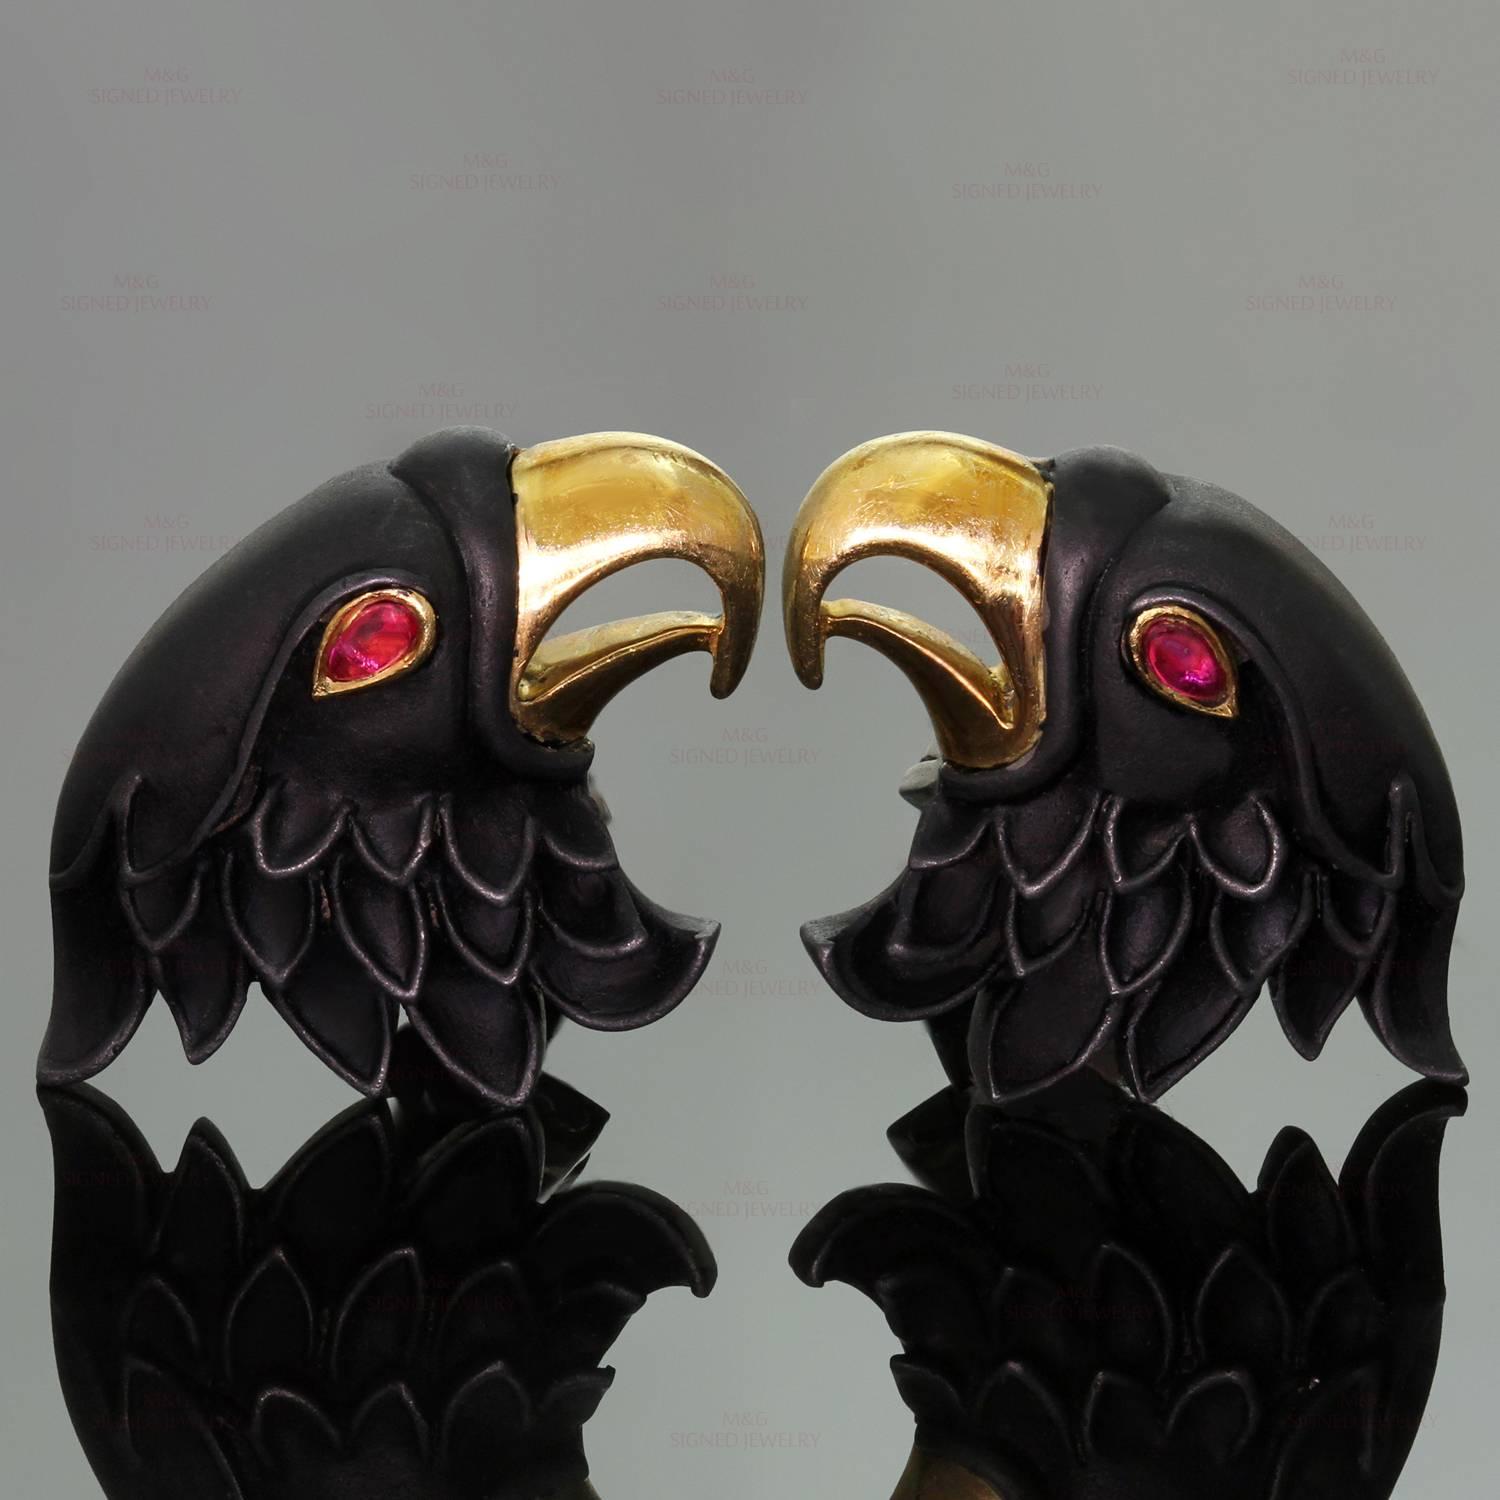 These unique Carrera y Carrera cufflinks are feature an eagle design hand-crafted out of yellow and blackened 18k gold with sculpted details and ruby eyes of an estimated 0.18 carats.  Made in Spain circa 1990s. Measurements: 0.98